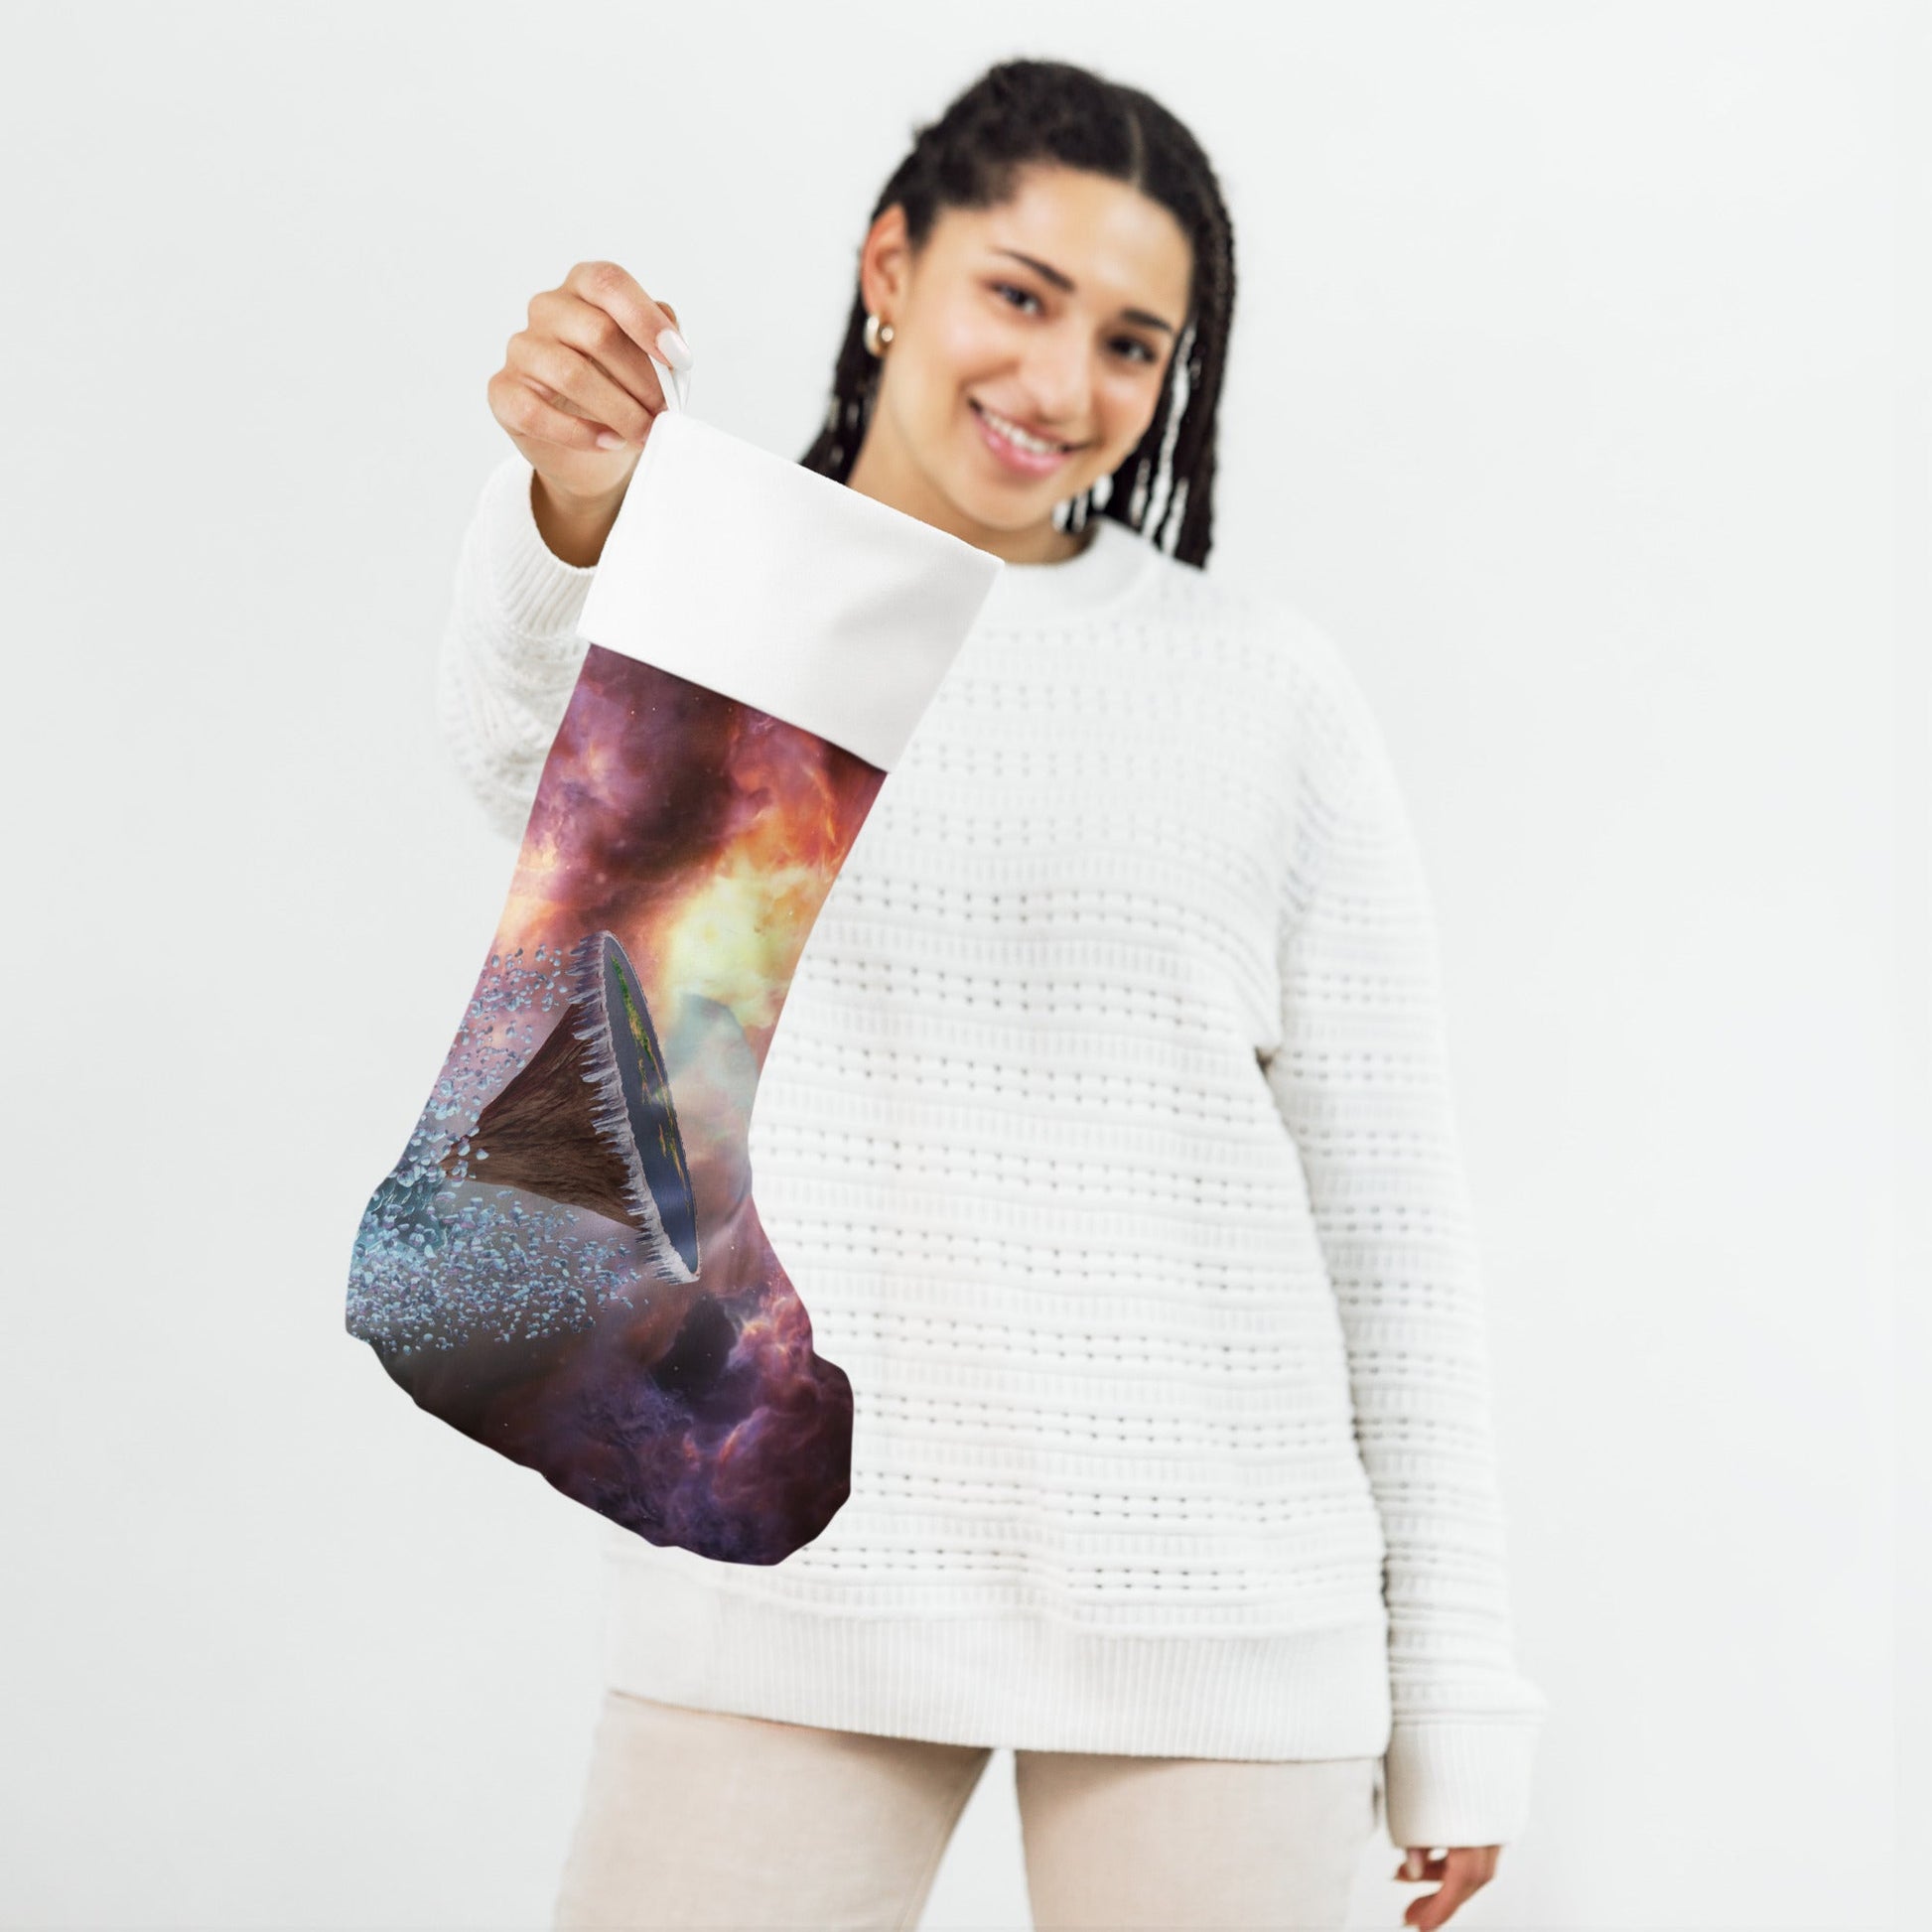 Intergalactic Space Force 2 Christmas Stocking - A Cosmic Holiday Delight - Spectral Ink Shop -